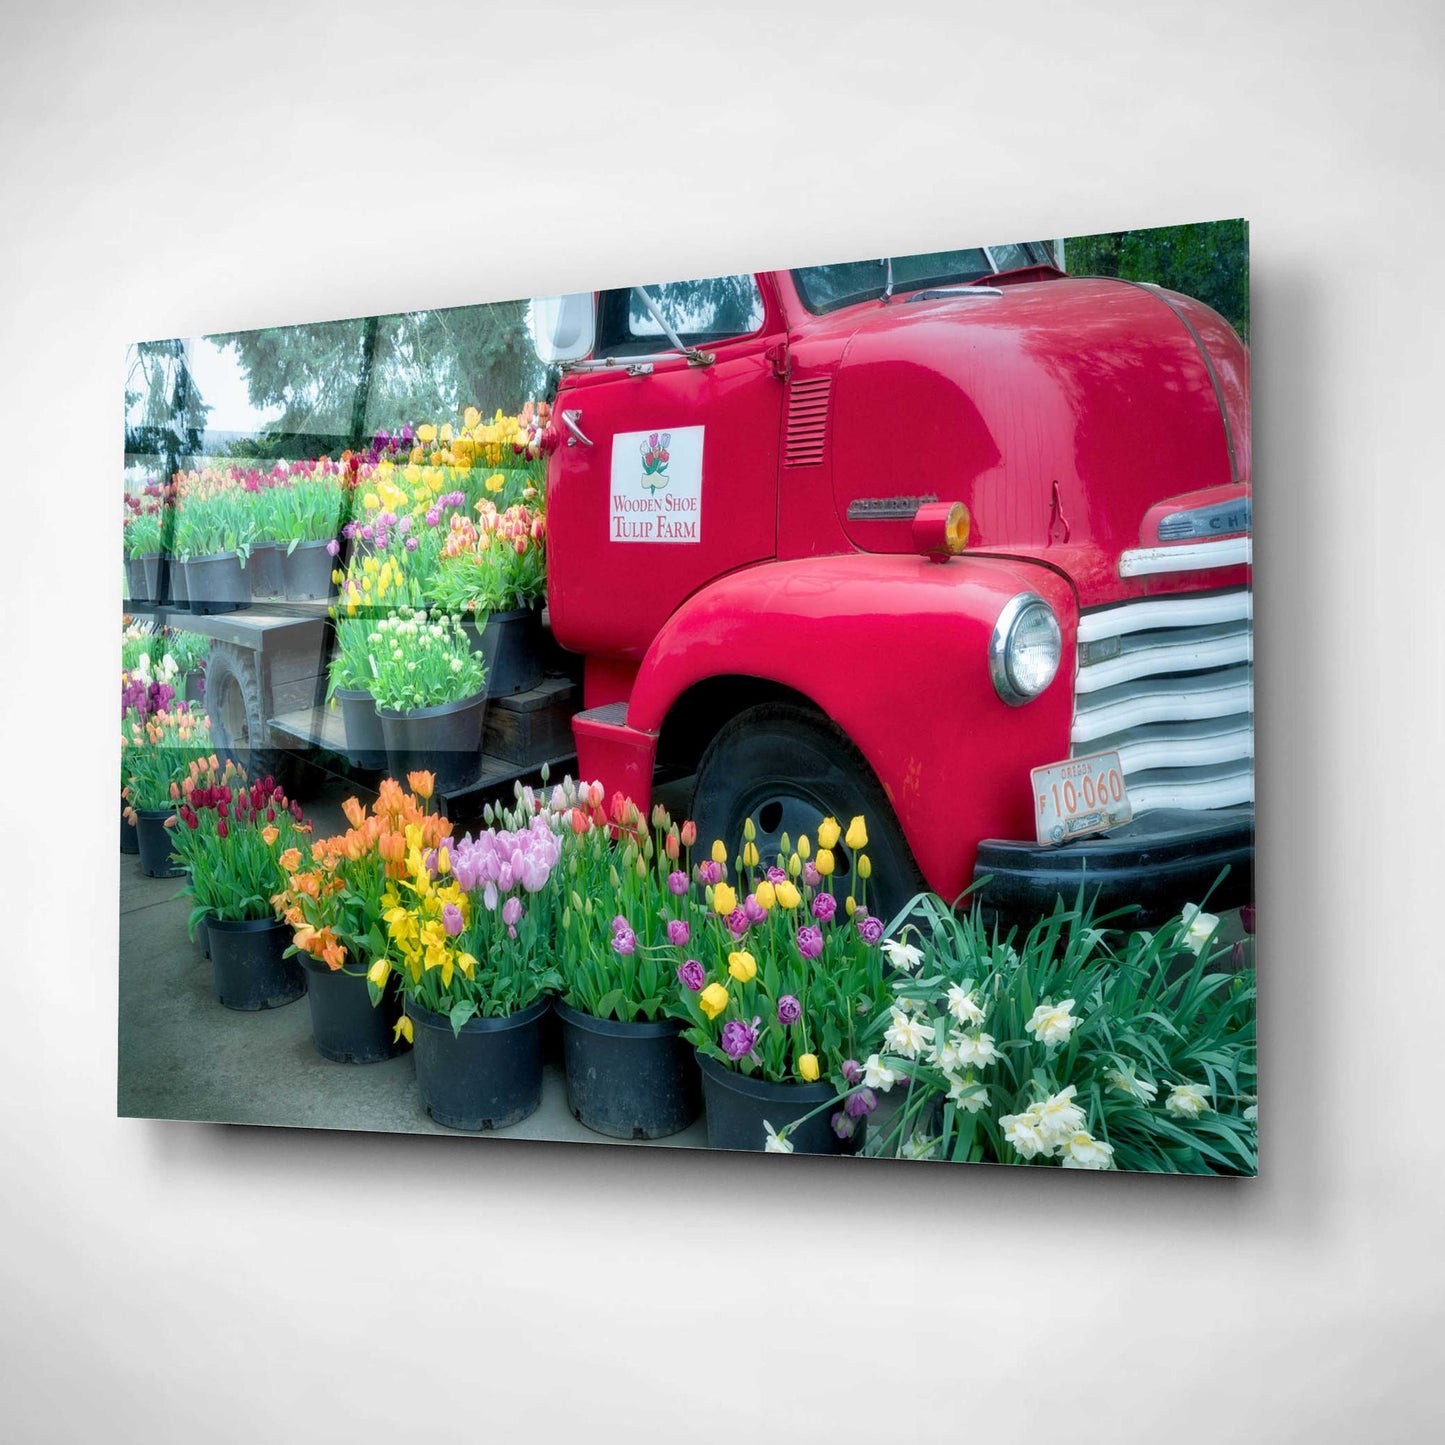 Epic Art 'Floral Truck' by Dennis Frates, Acrylic Glass Wall Art,16x12